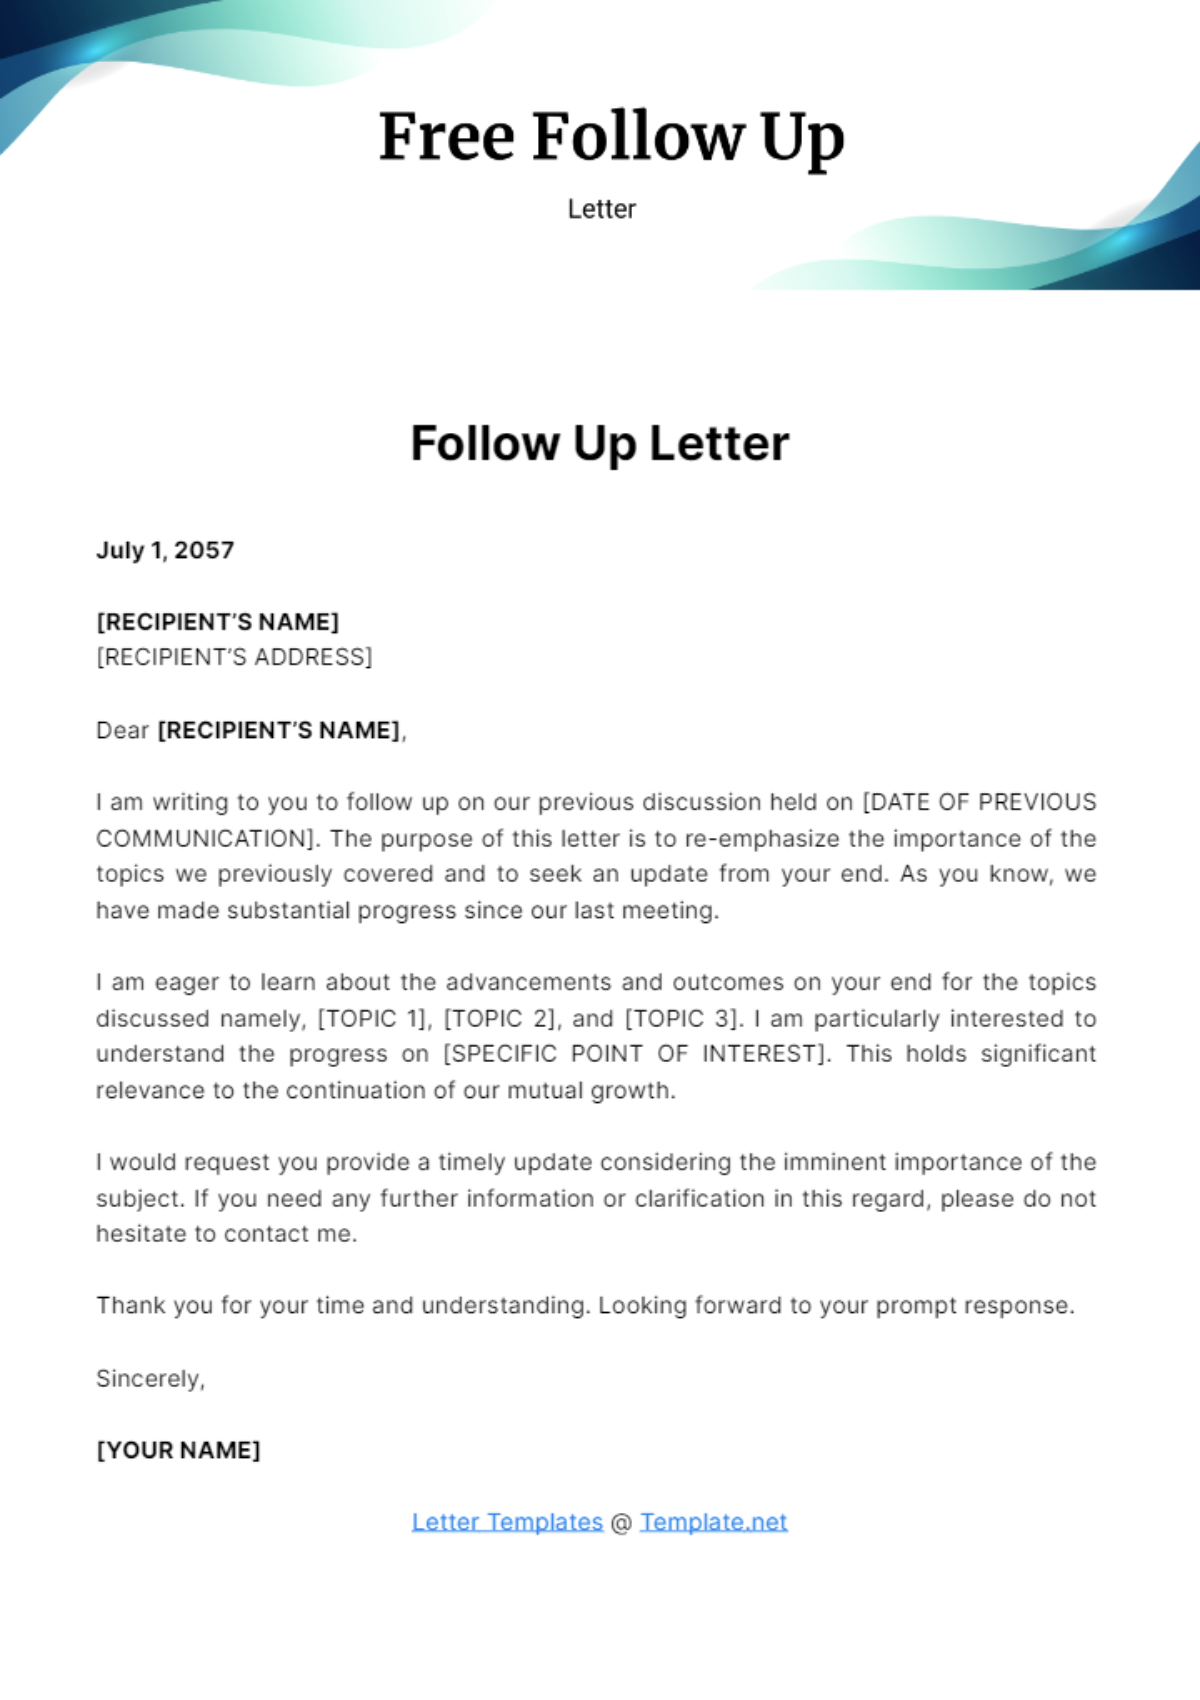 Free Follow Up Letter Template